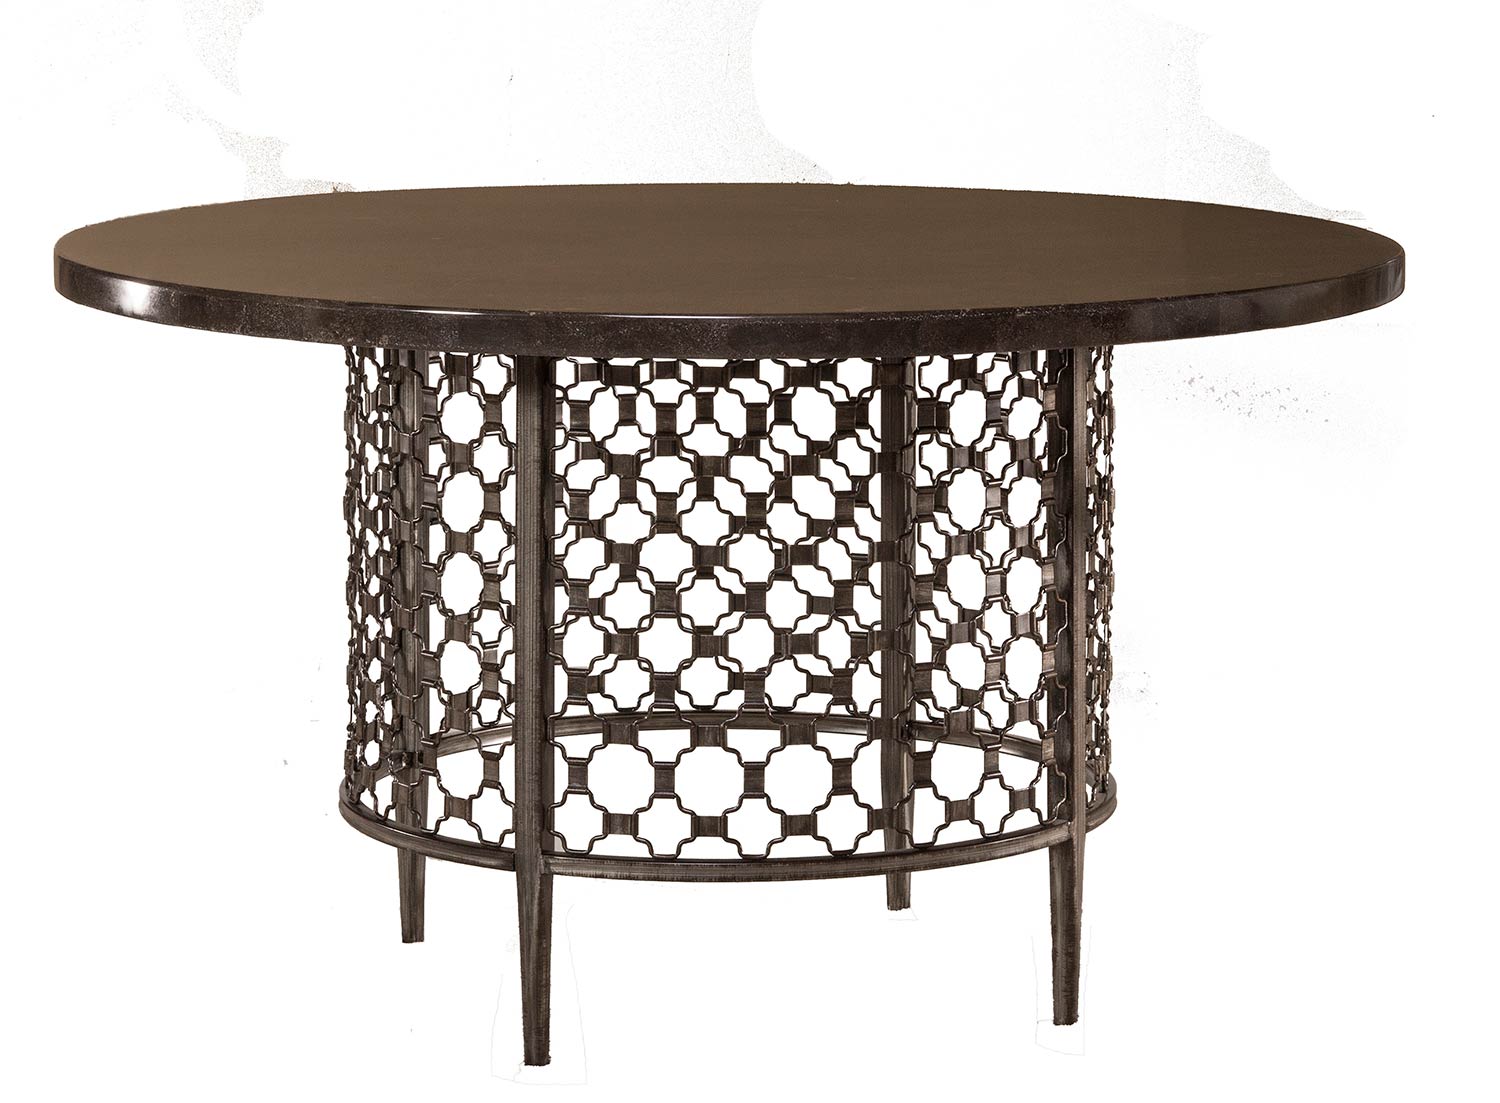 Hillsdale Brescello Round Dining Table - Charcoal/Blue Stone